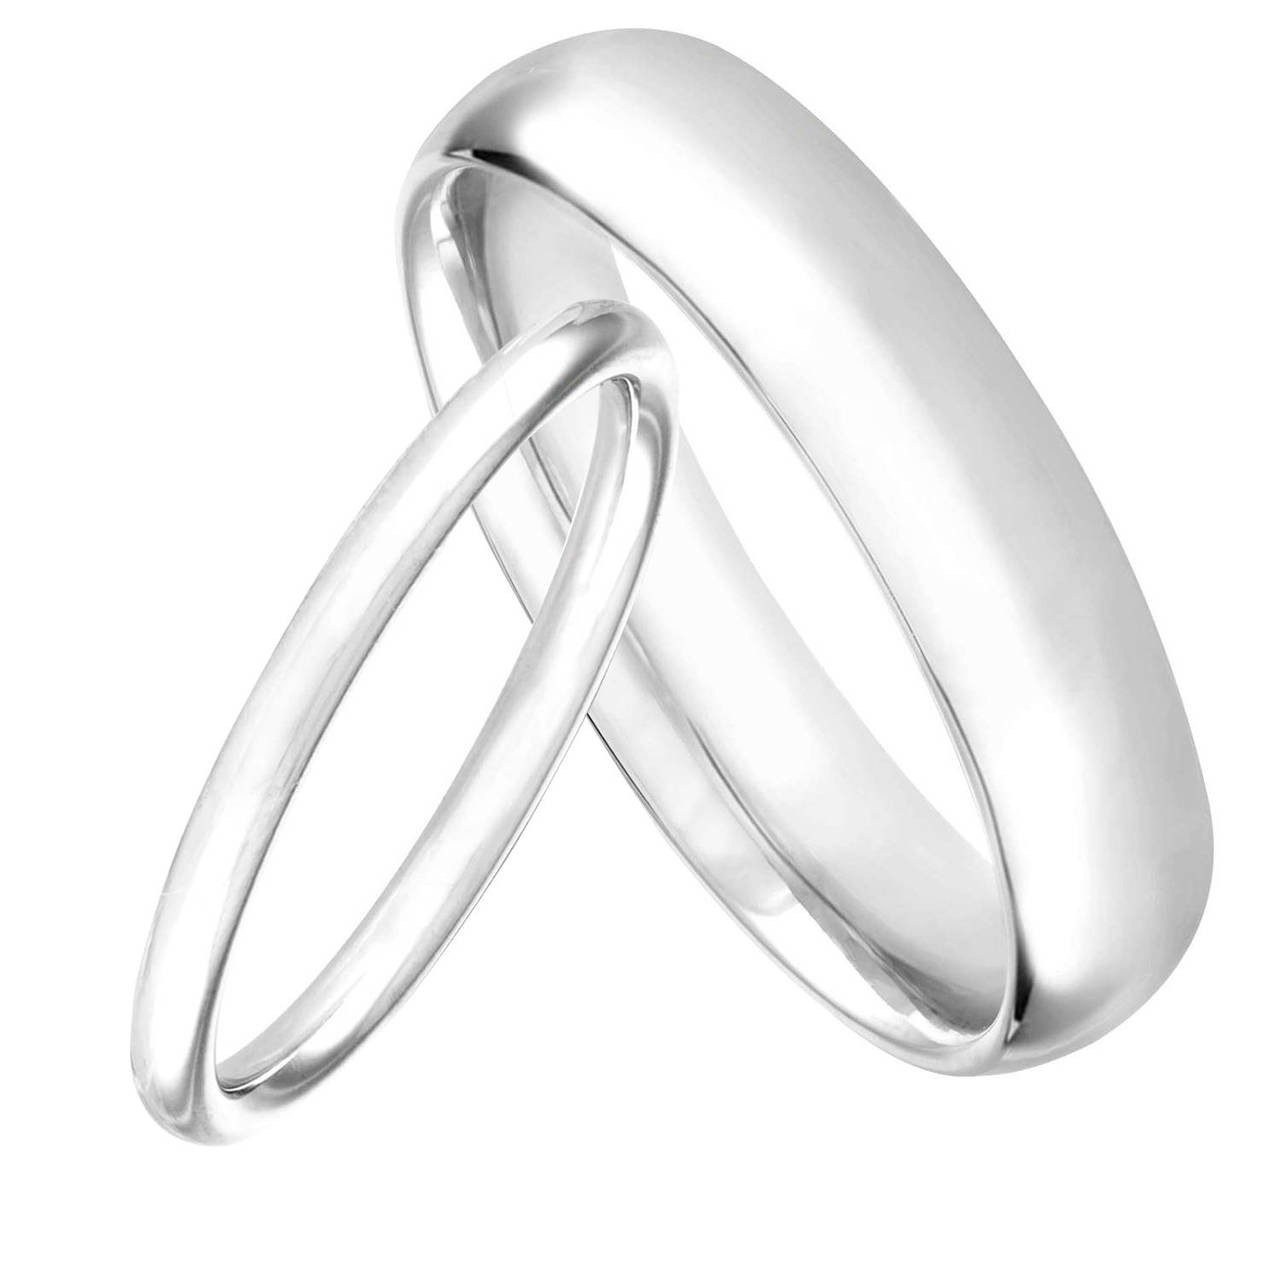 Platinum His And Hers Wedding Bands Matching Wedding Rings Couple Wedding Bands Set Anniversary Bands 6 Mm And 2 Mm   46935.1505432173.1280.1280 ?c=2